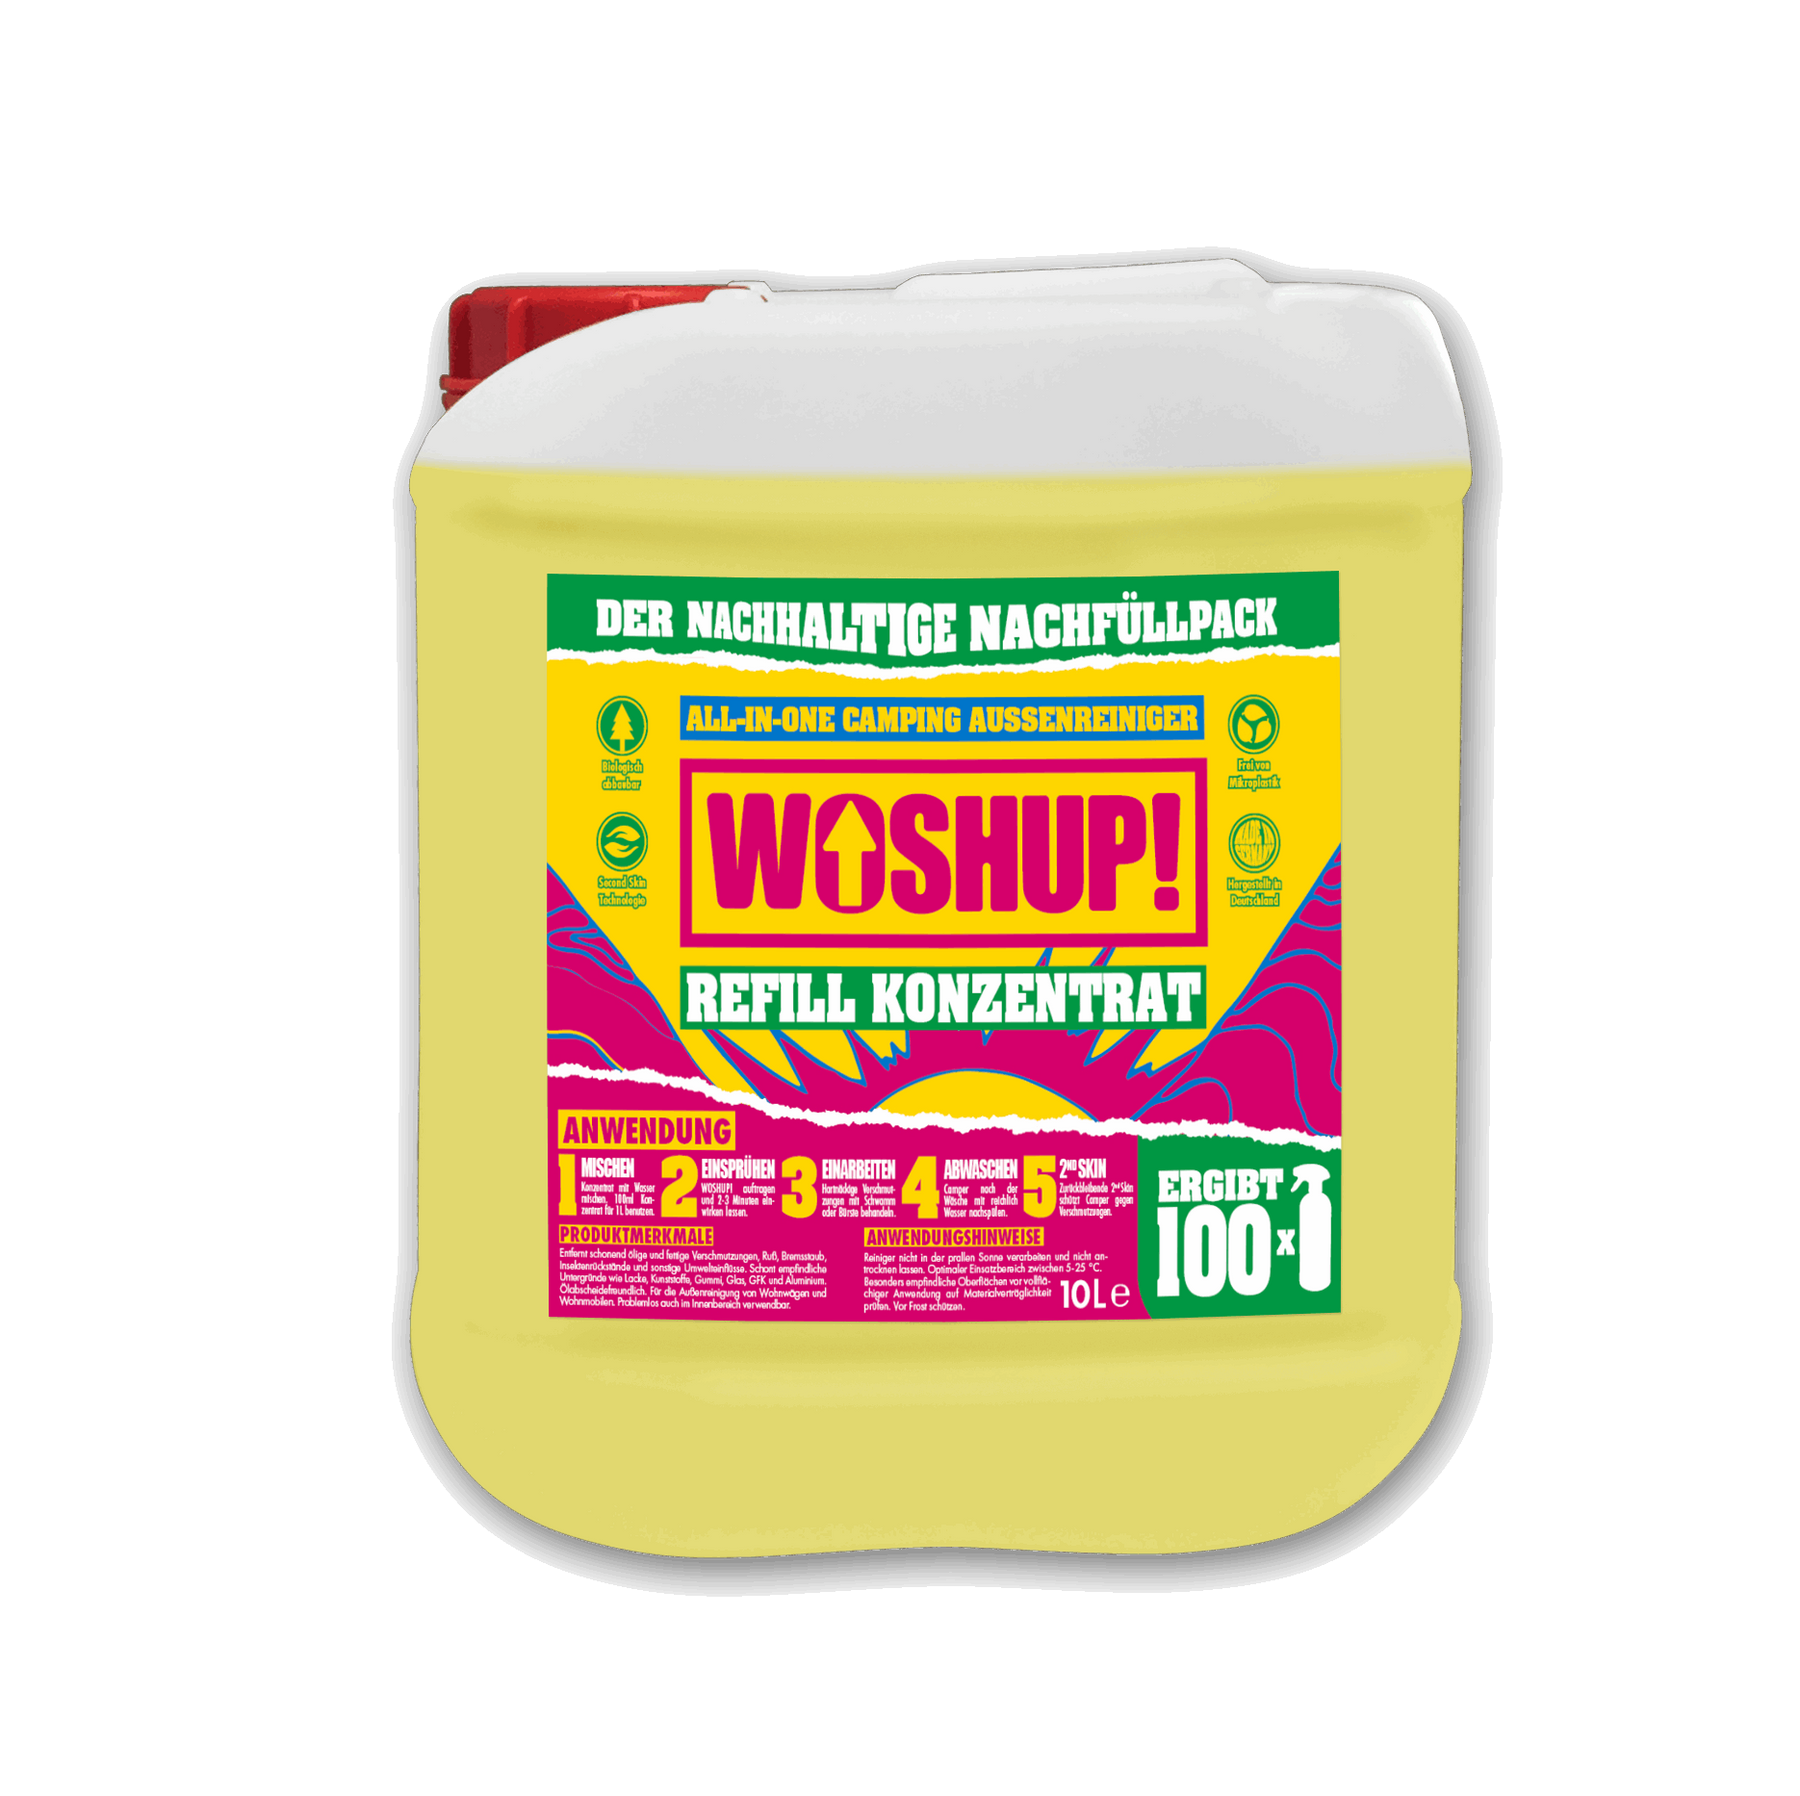 CAMPING CLEANER Refill Konzentrat WOSHUP